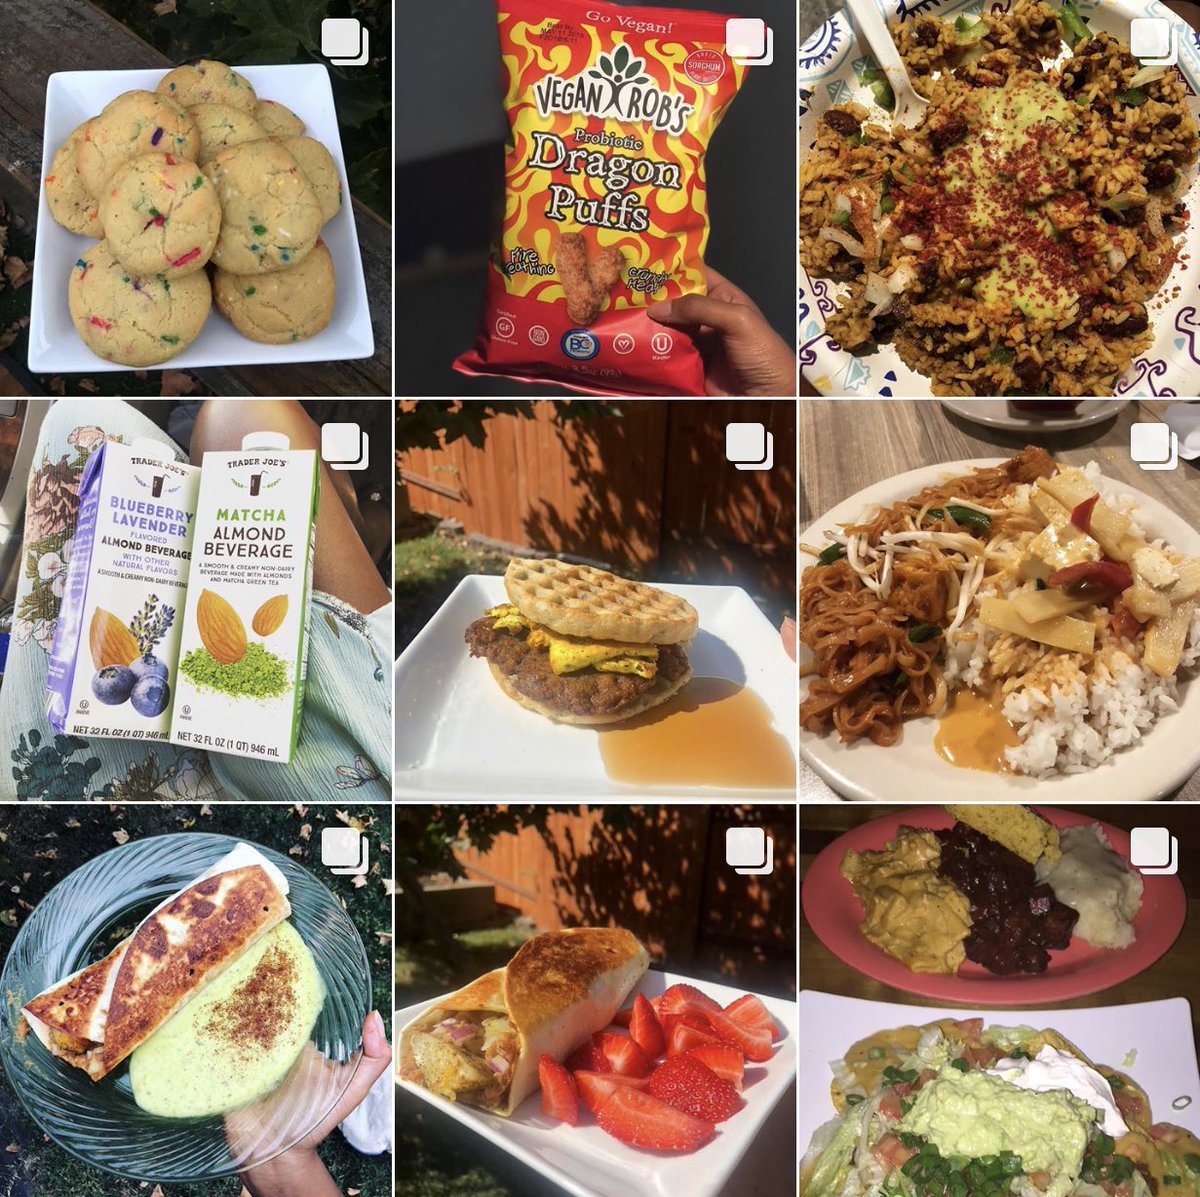 i also have a junk food Instagram account called @anotherjunkfoodvegan in case you guys need any inspo + support 